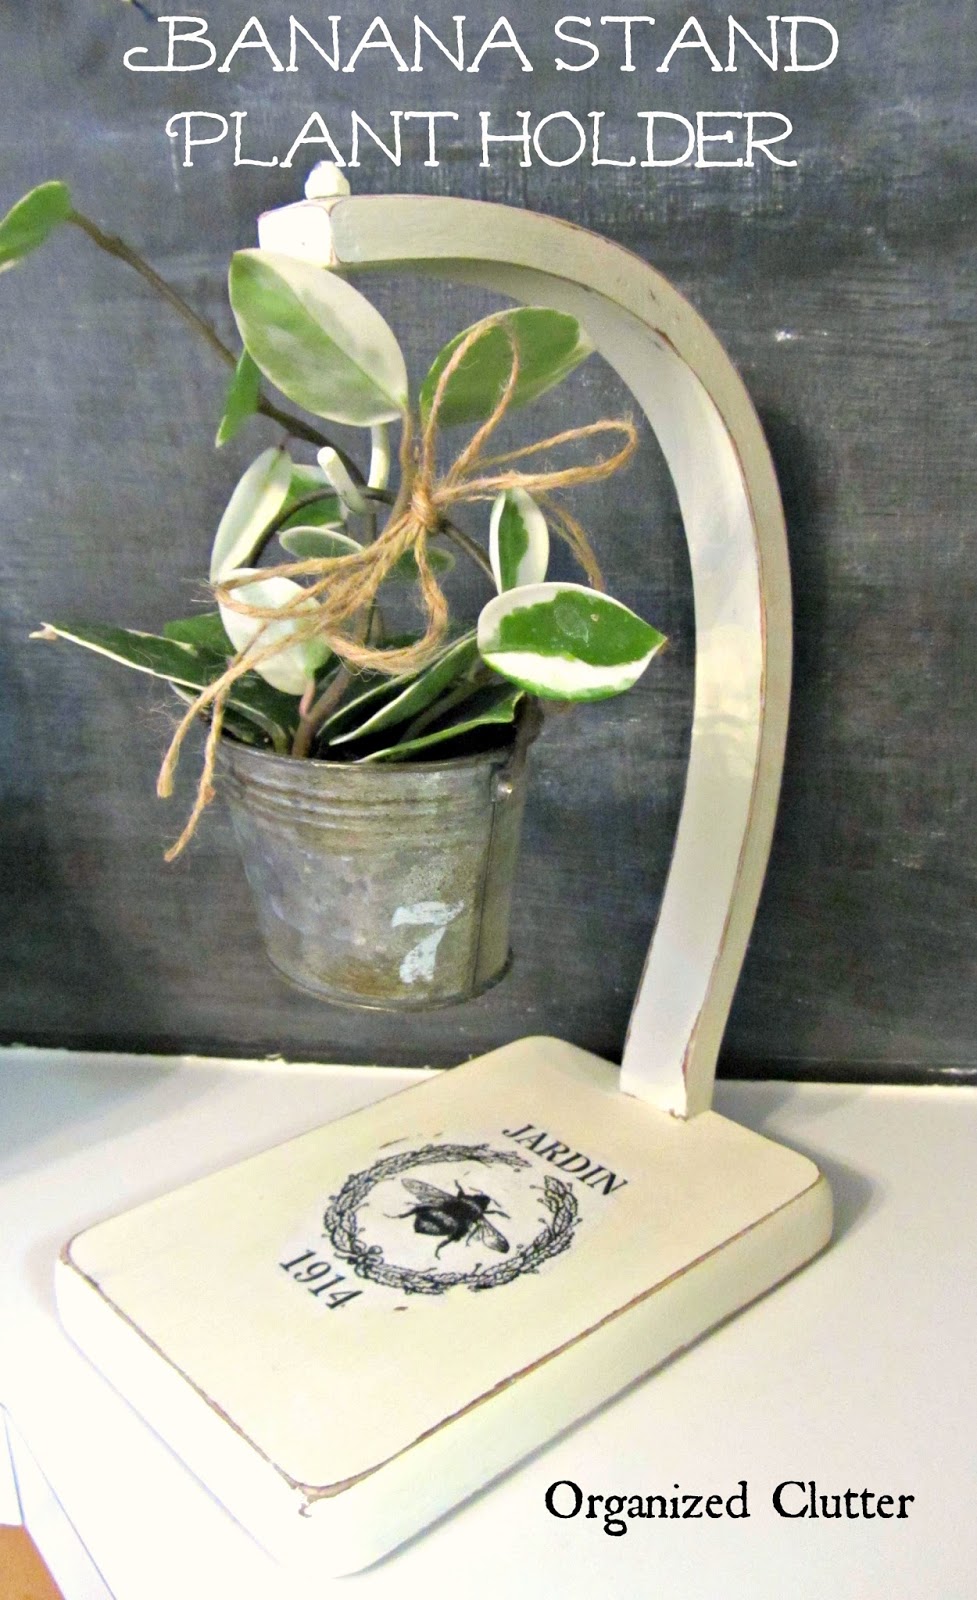 Wax Plant Displayed on Upcycled Banana Stand www.organizedclutterqueen.blogspot.com